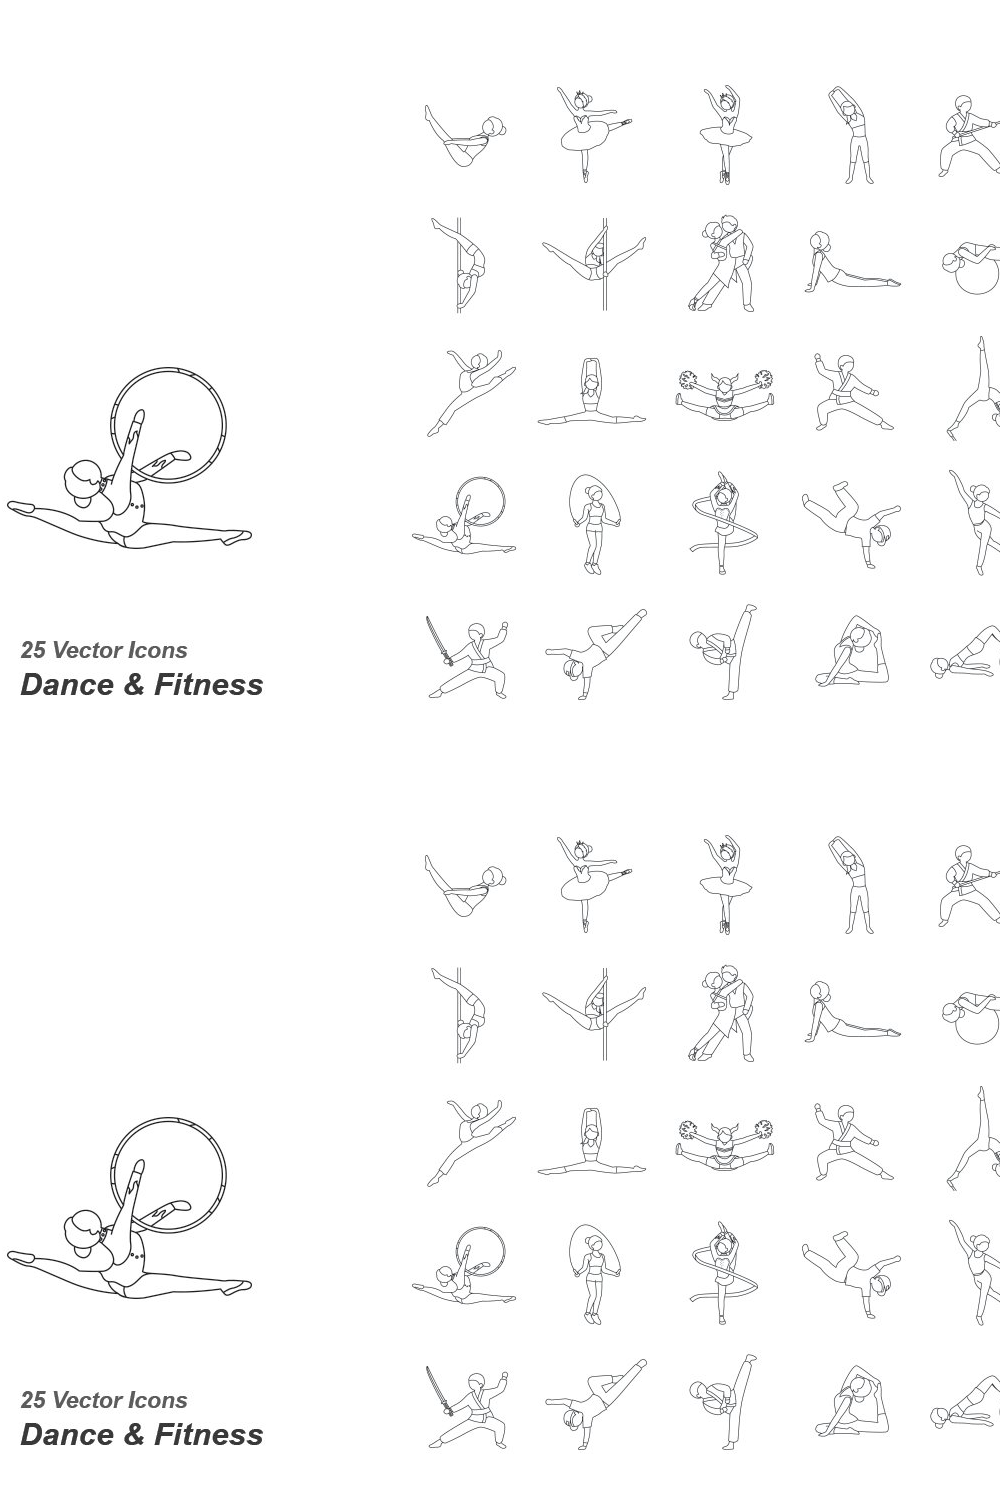 Illustrations dance fitness outlines vector icon of pinterest.